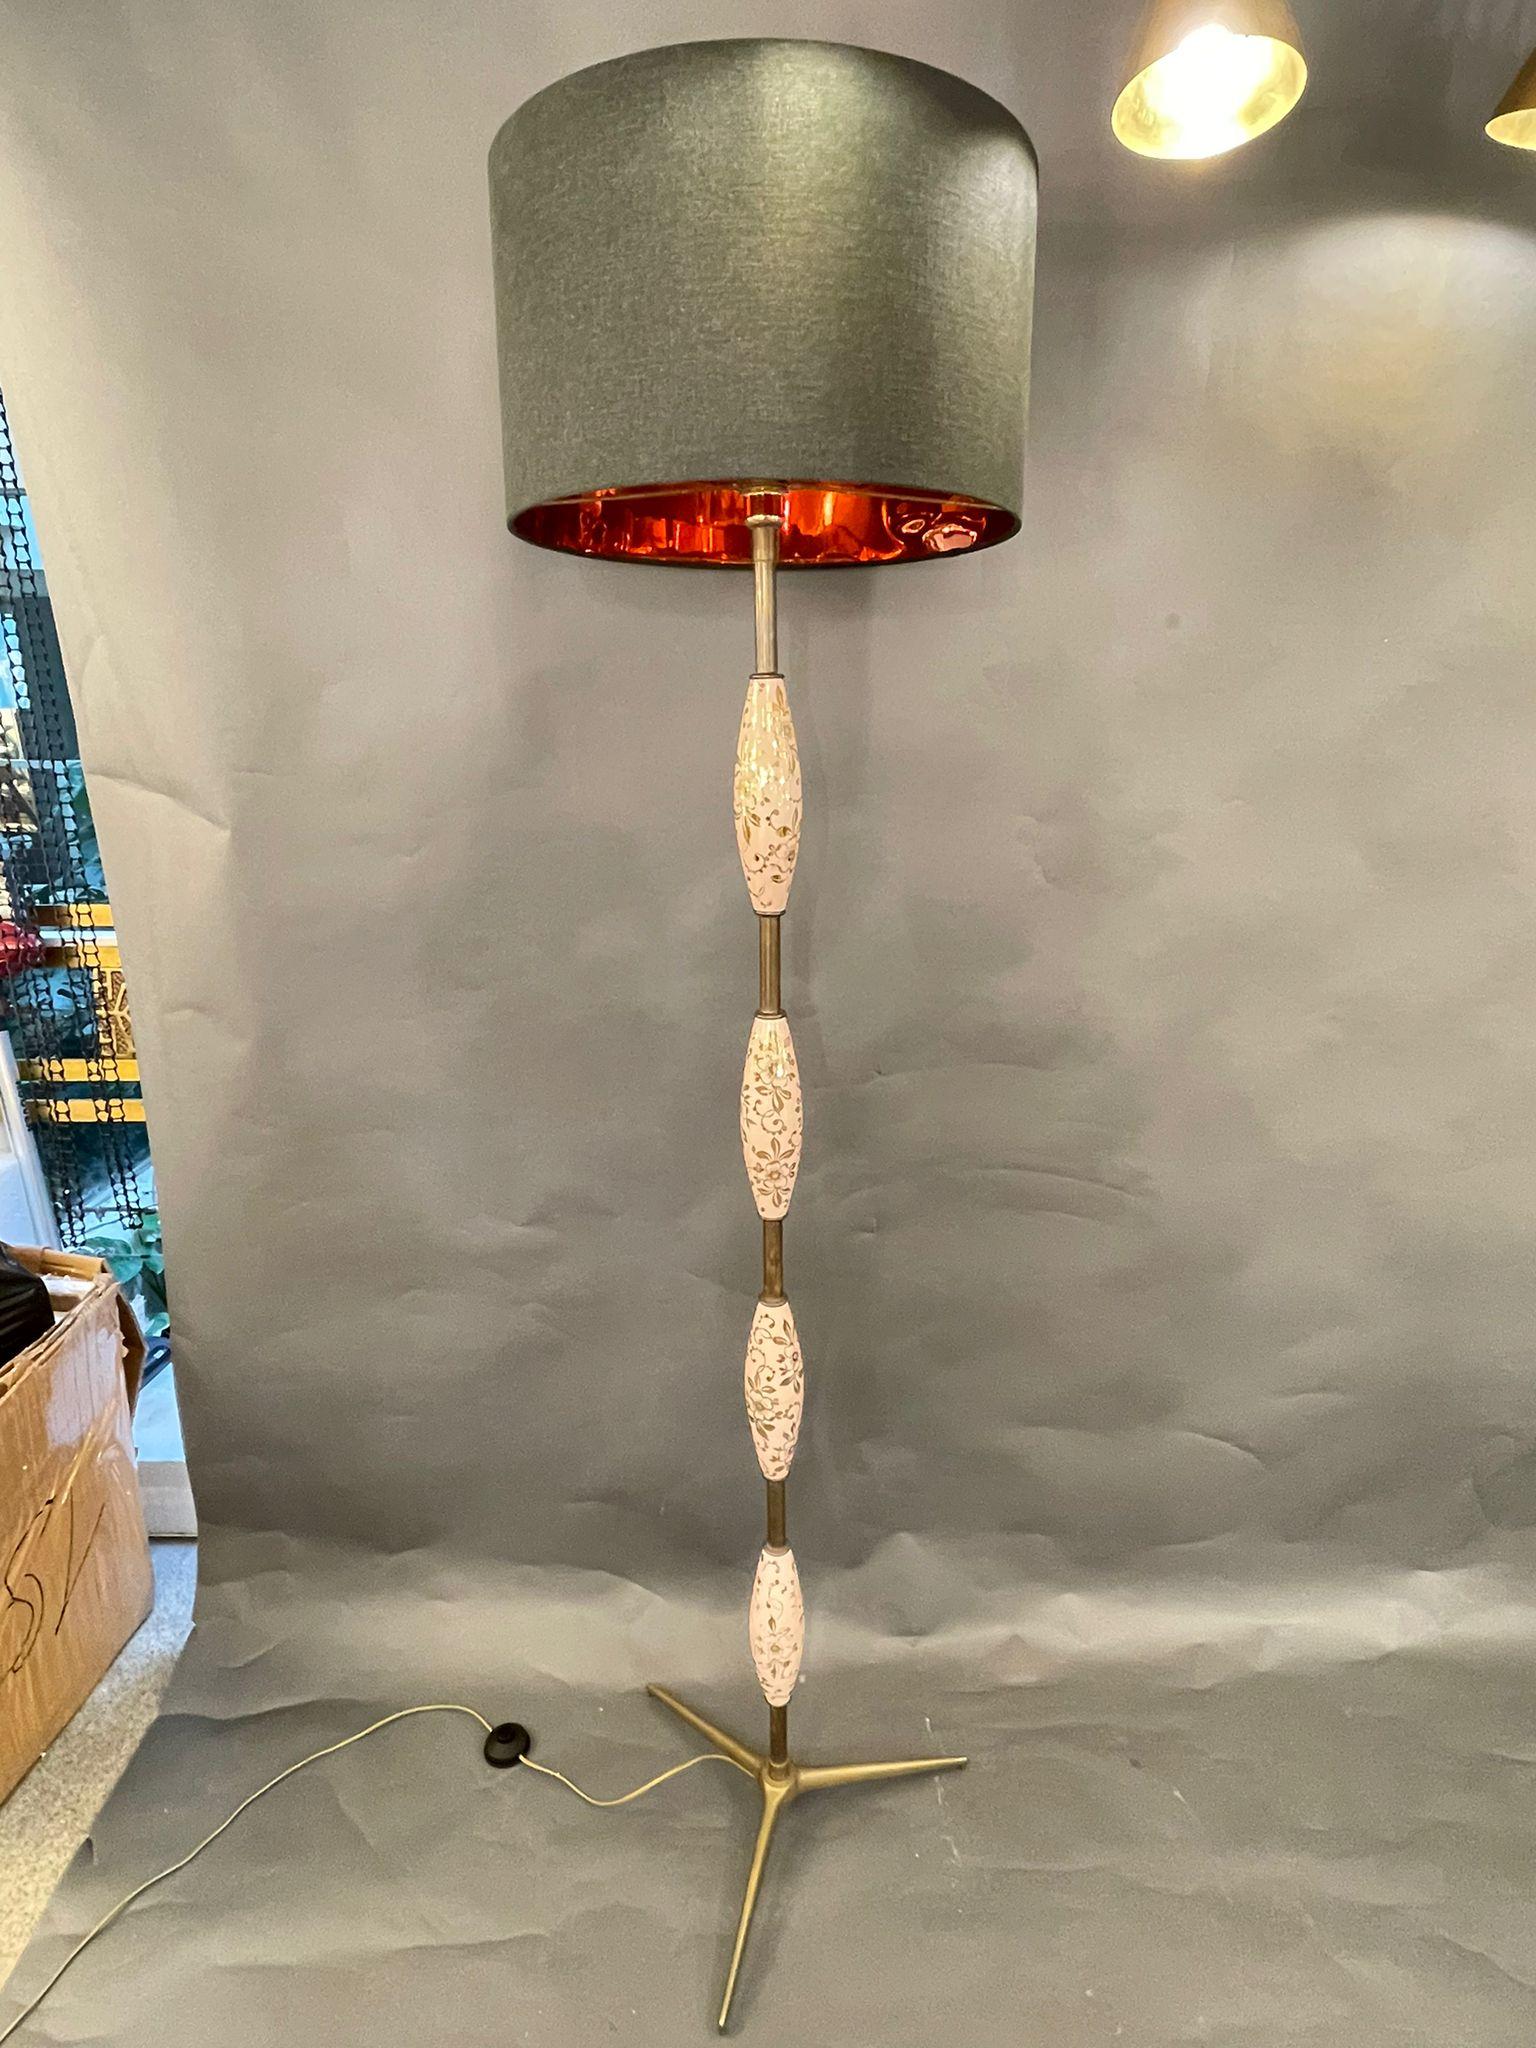 A rare floor lamp in pink ceramic with hand painted gold flowers. Italy 1950s.